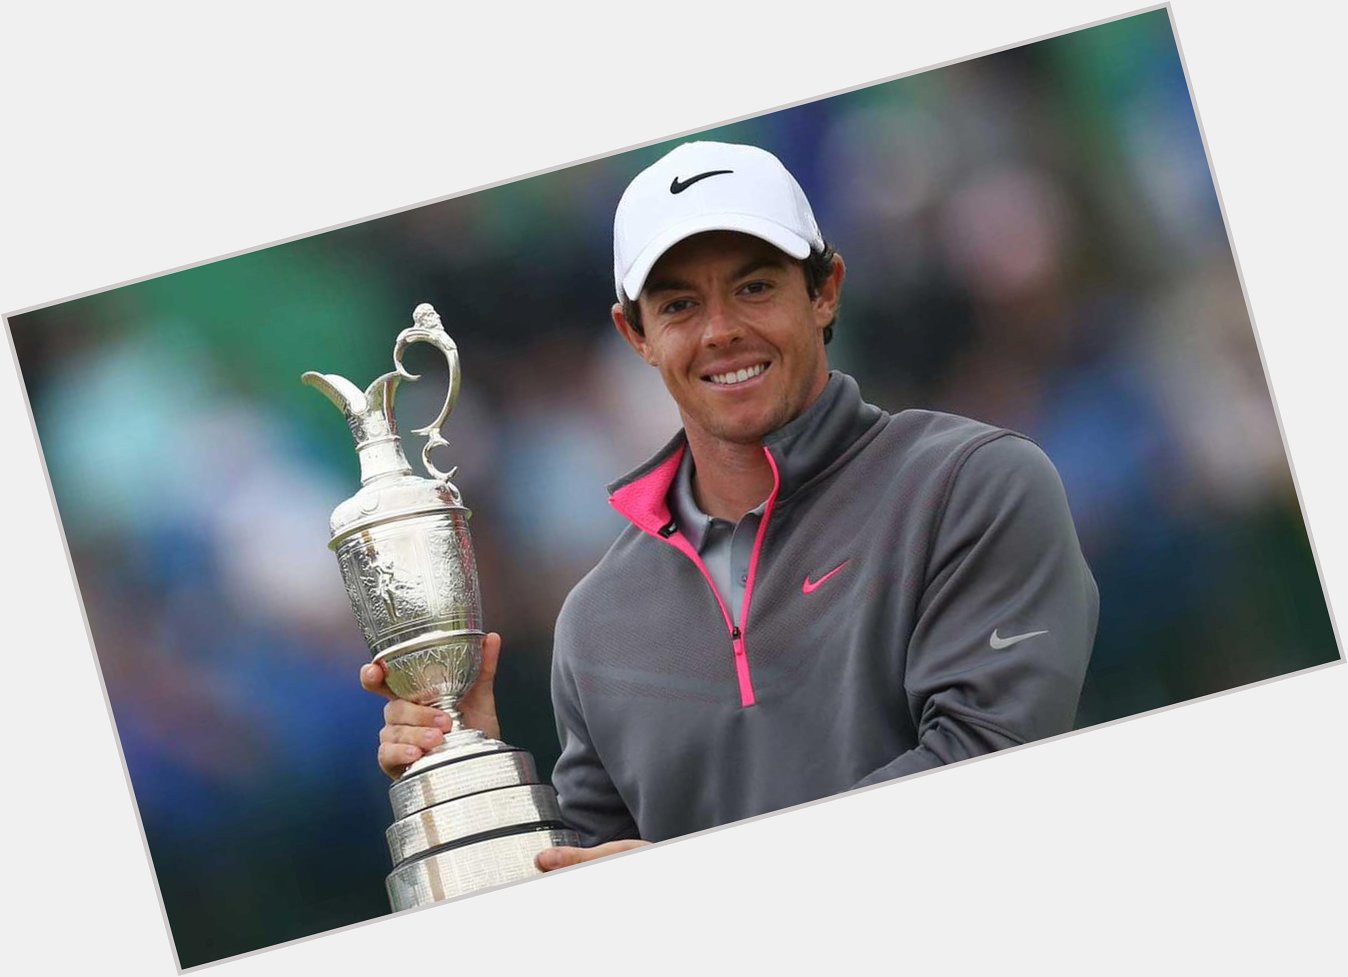 Current World Number One in golf, Rory McIlroy was born 4 May, 1989. Happy Birthday 